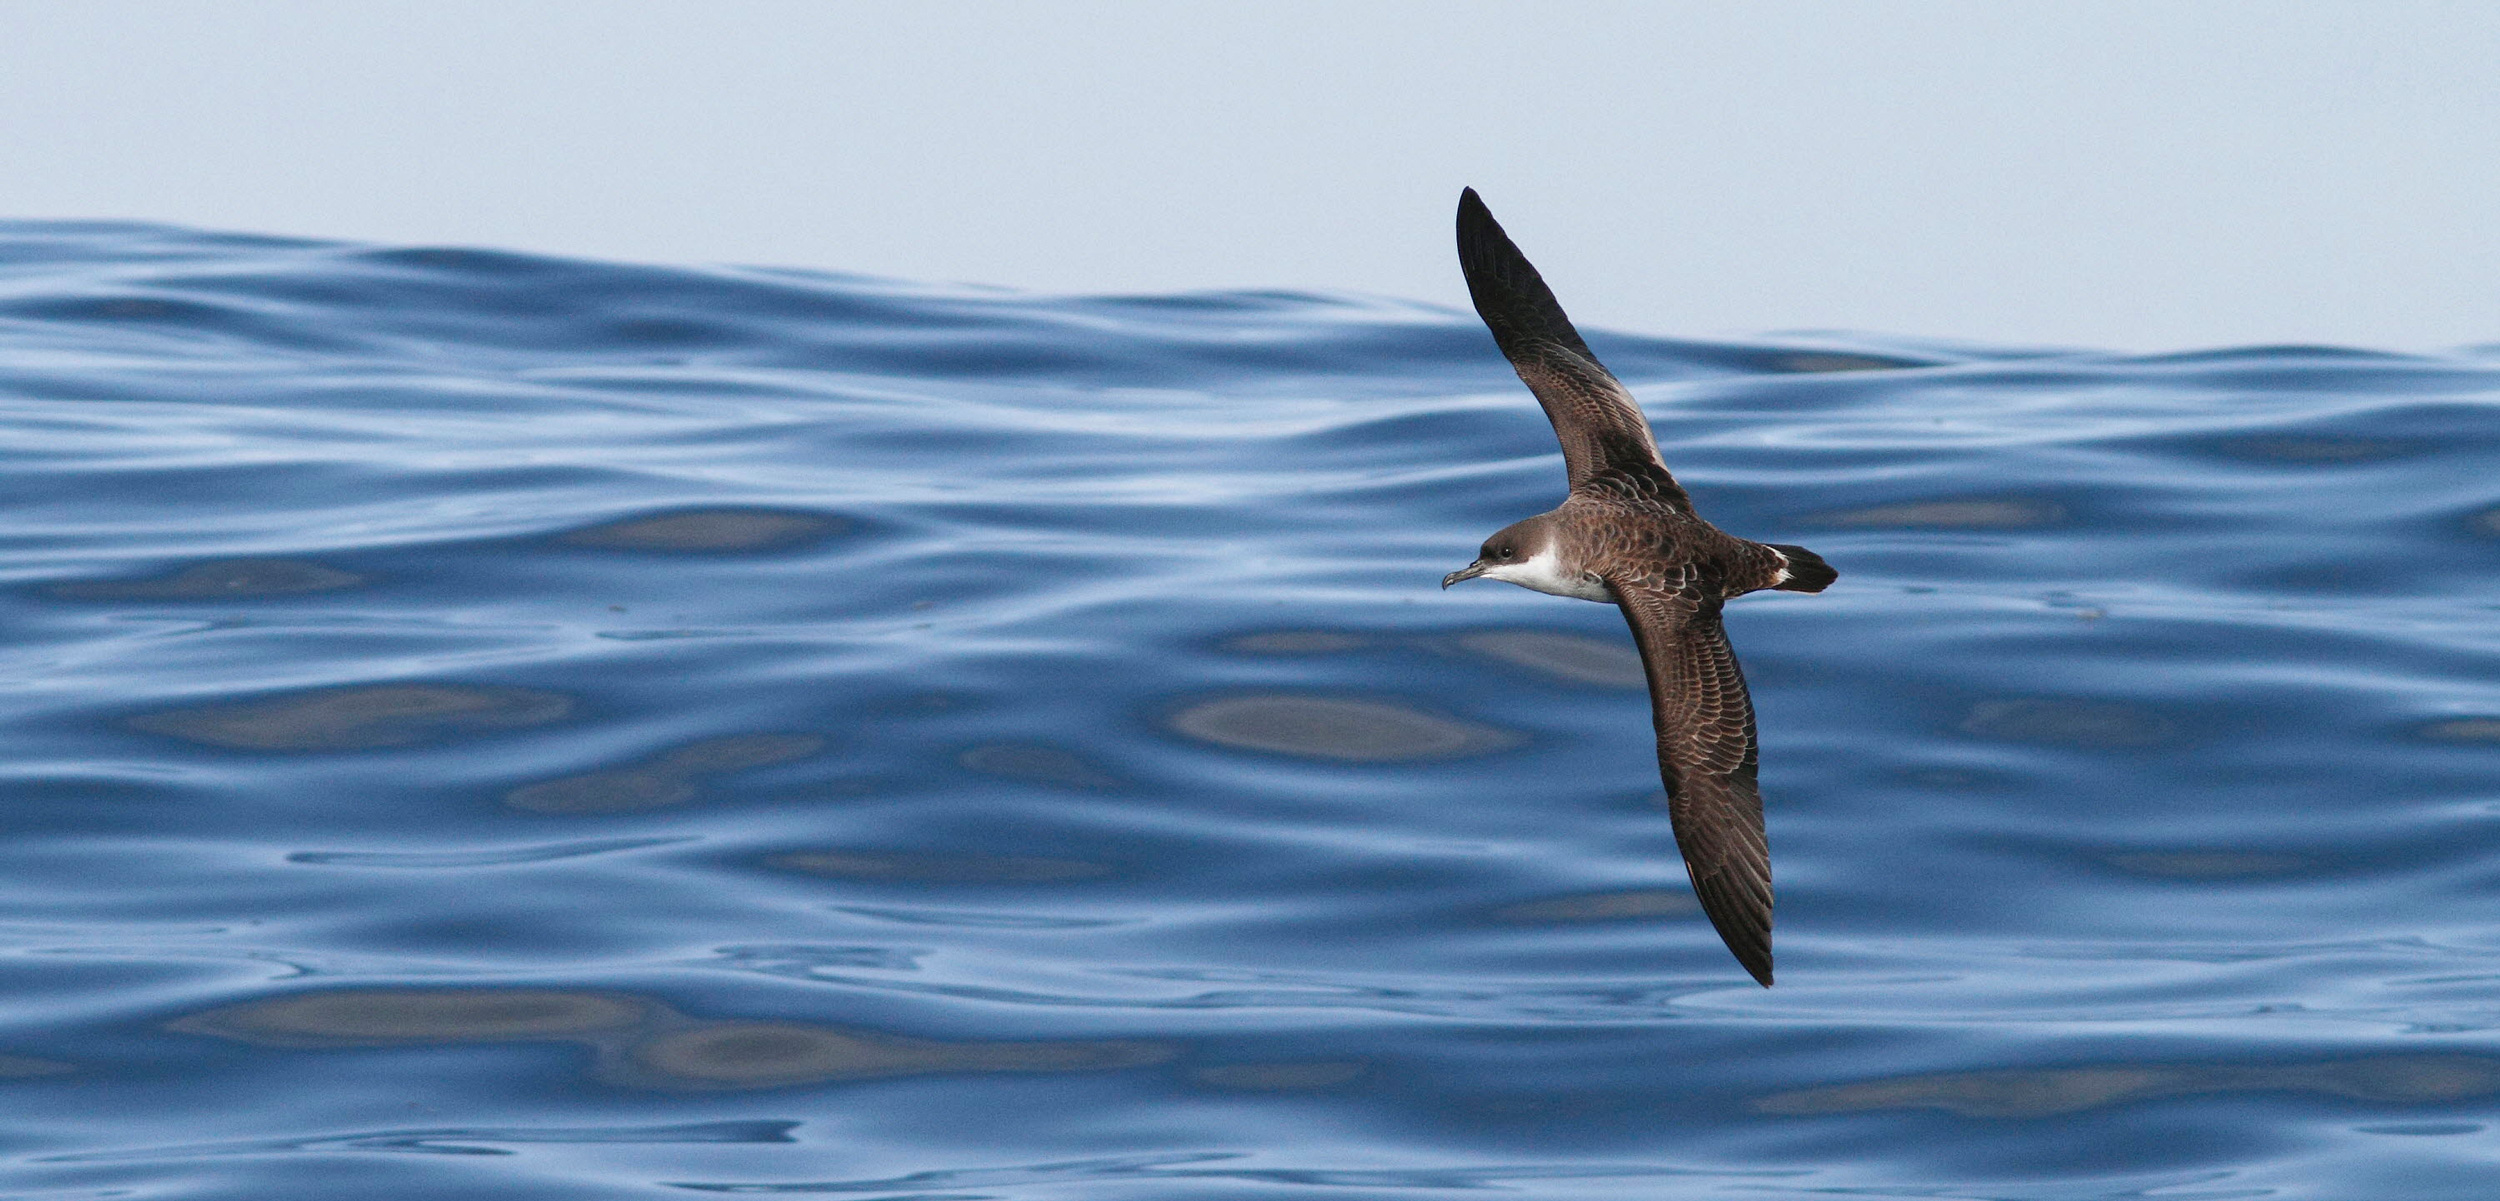 Great Shearwater (Puffinus gravis) flying over water